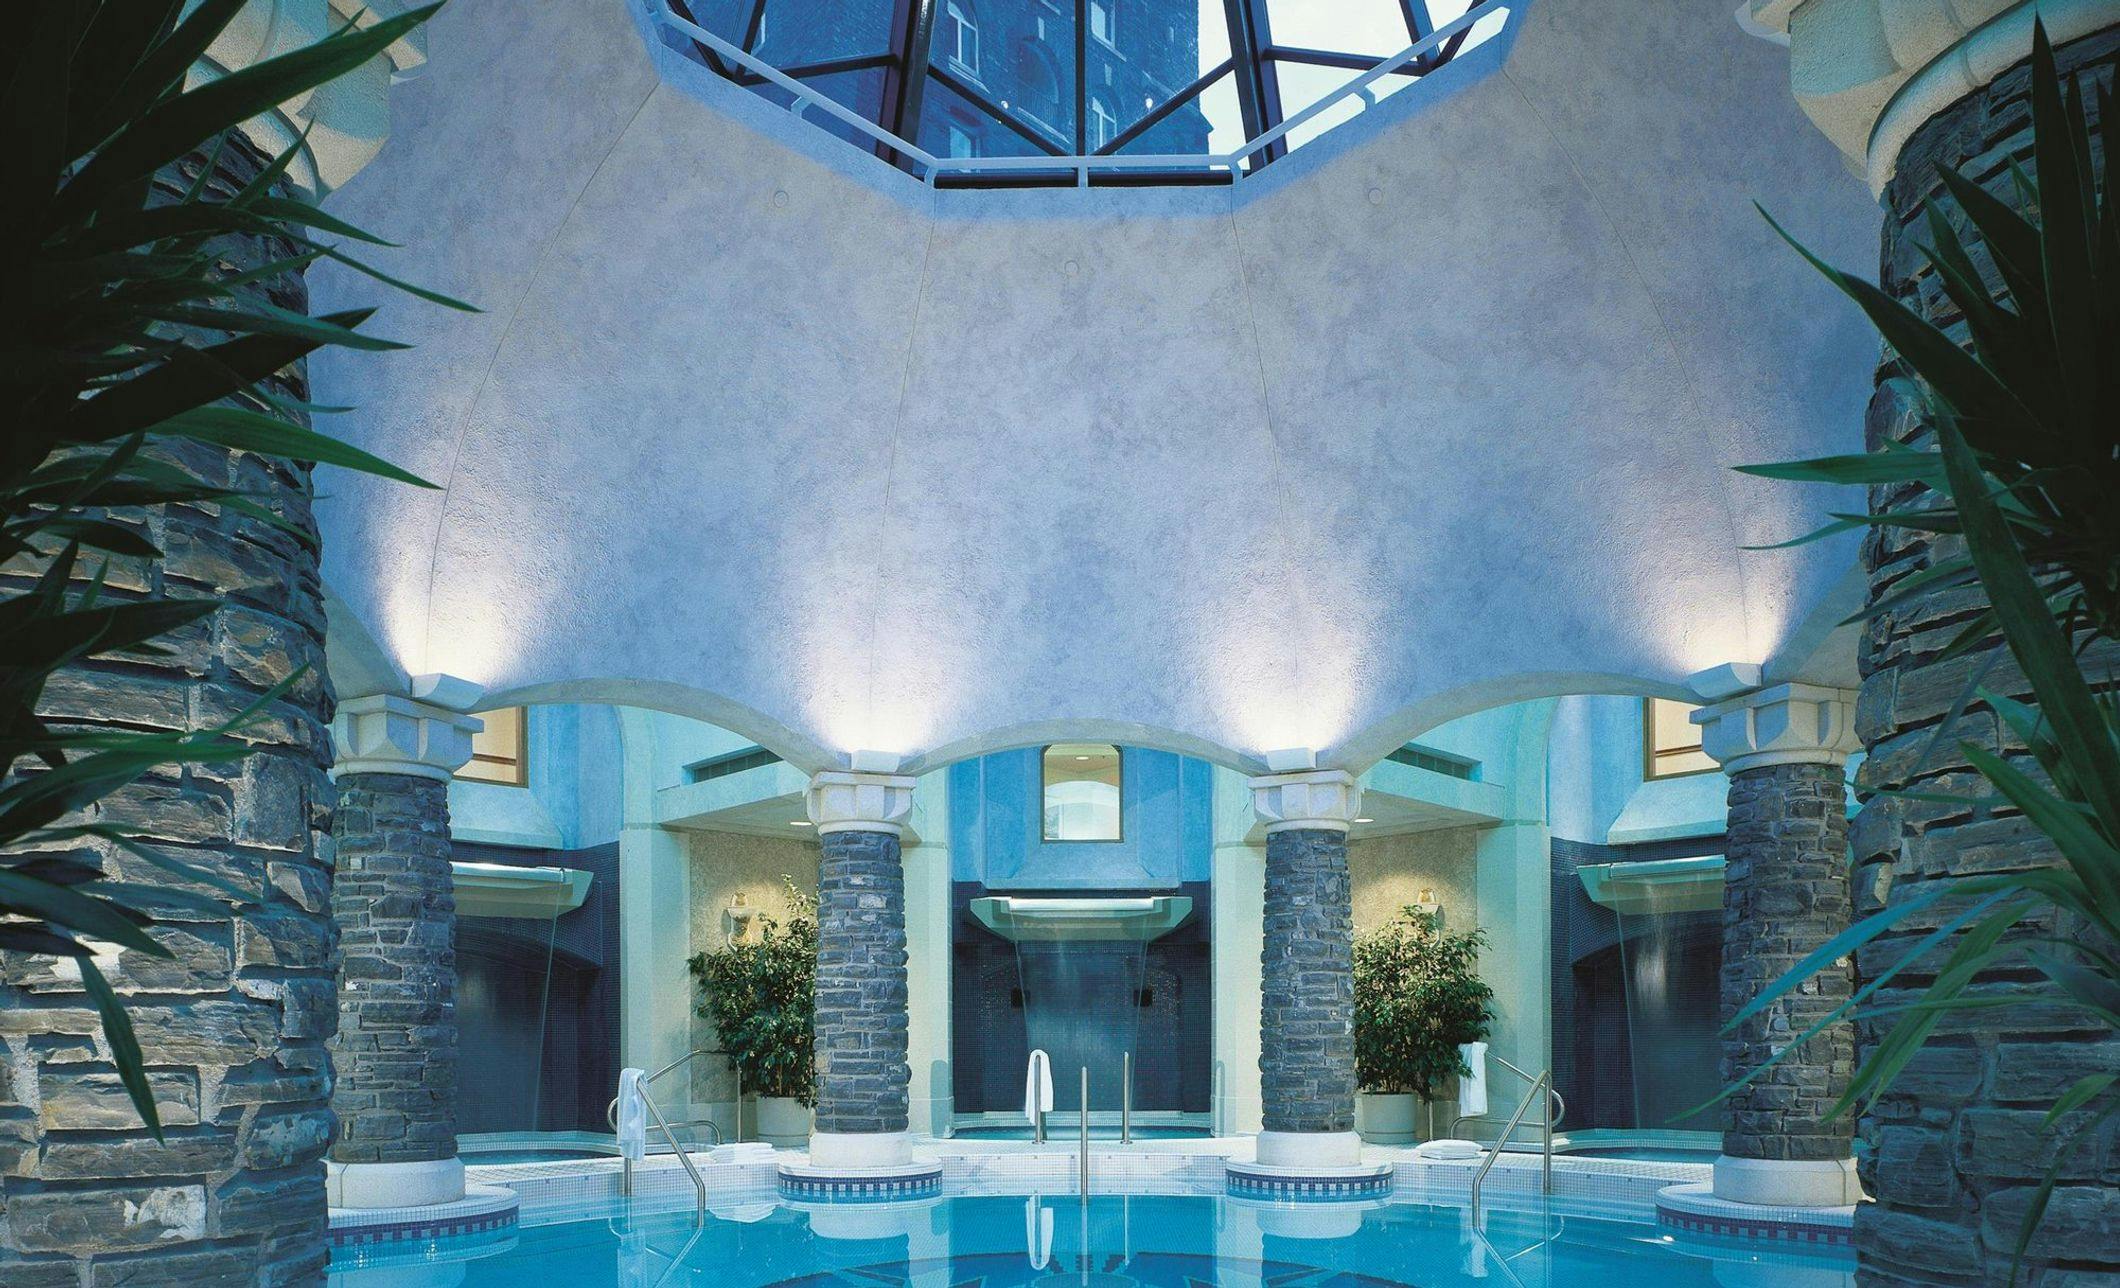 Mineral Pool surrounded by three waterfall plunge pools and a skylight in the ceiling